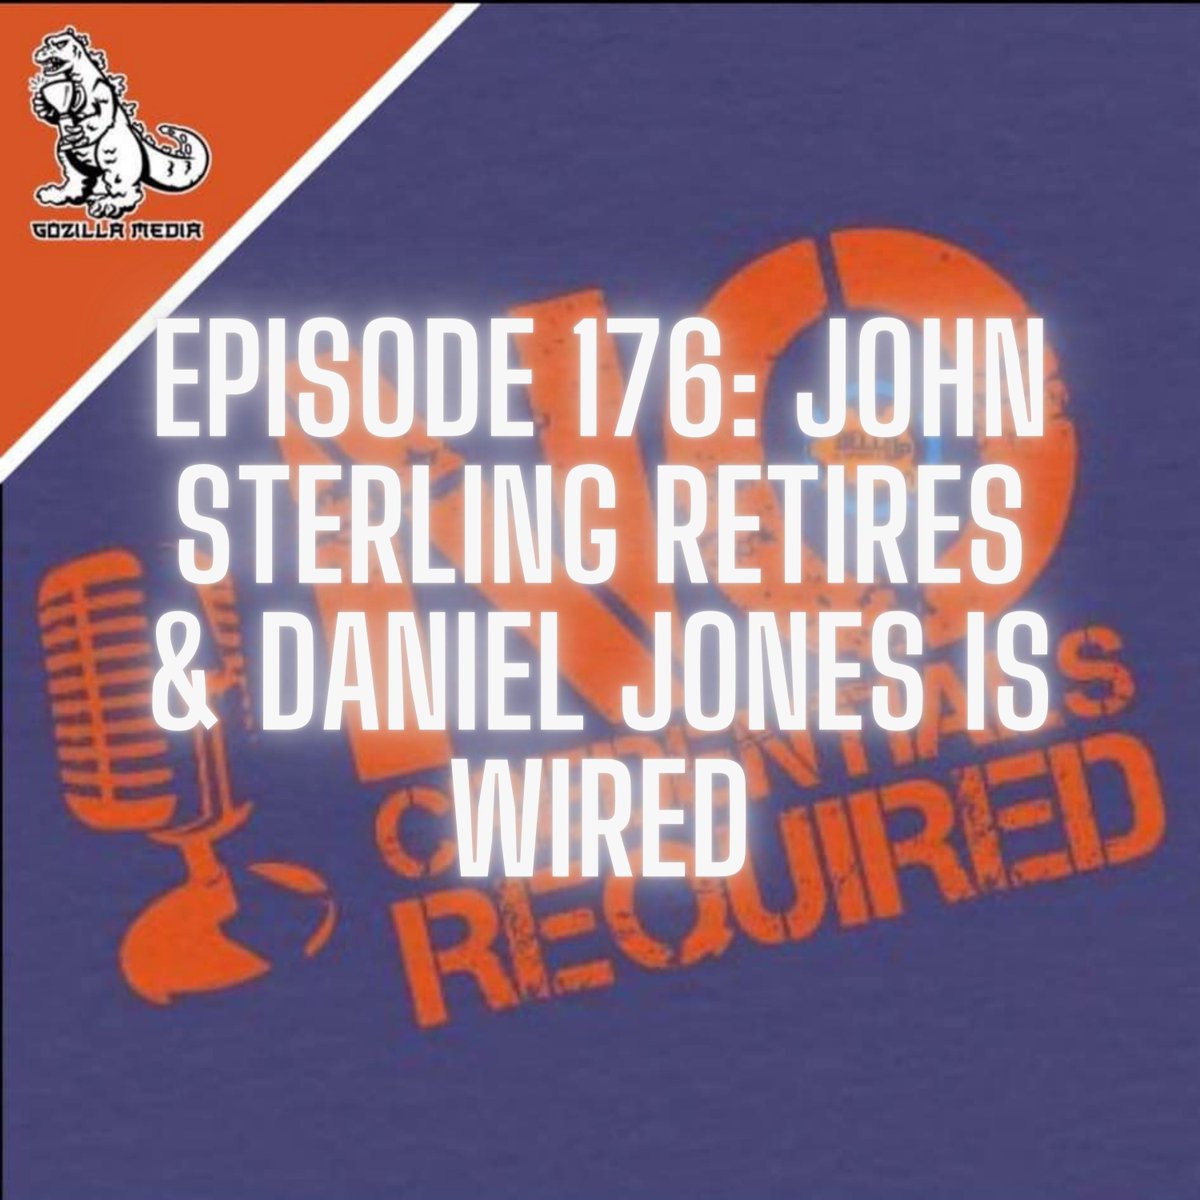 Need a lunchtime listen? Episode 176 is now available! - Reacting to John Sterling's retirement; - The poopy-pantsing over Nestor's pump-fake; - A pitcher as a pinch runner?; - Britain's reaction to Cedric Rollins' amazing catch, and; - Daniel Jones goes full Adam Gase. Click